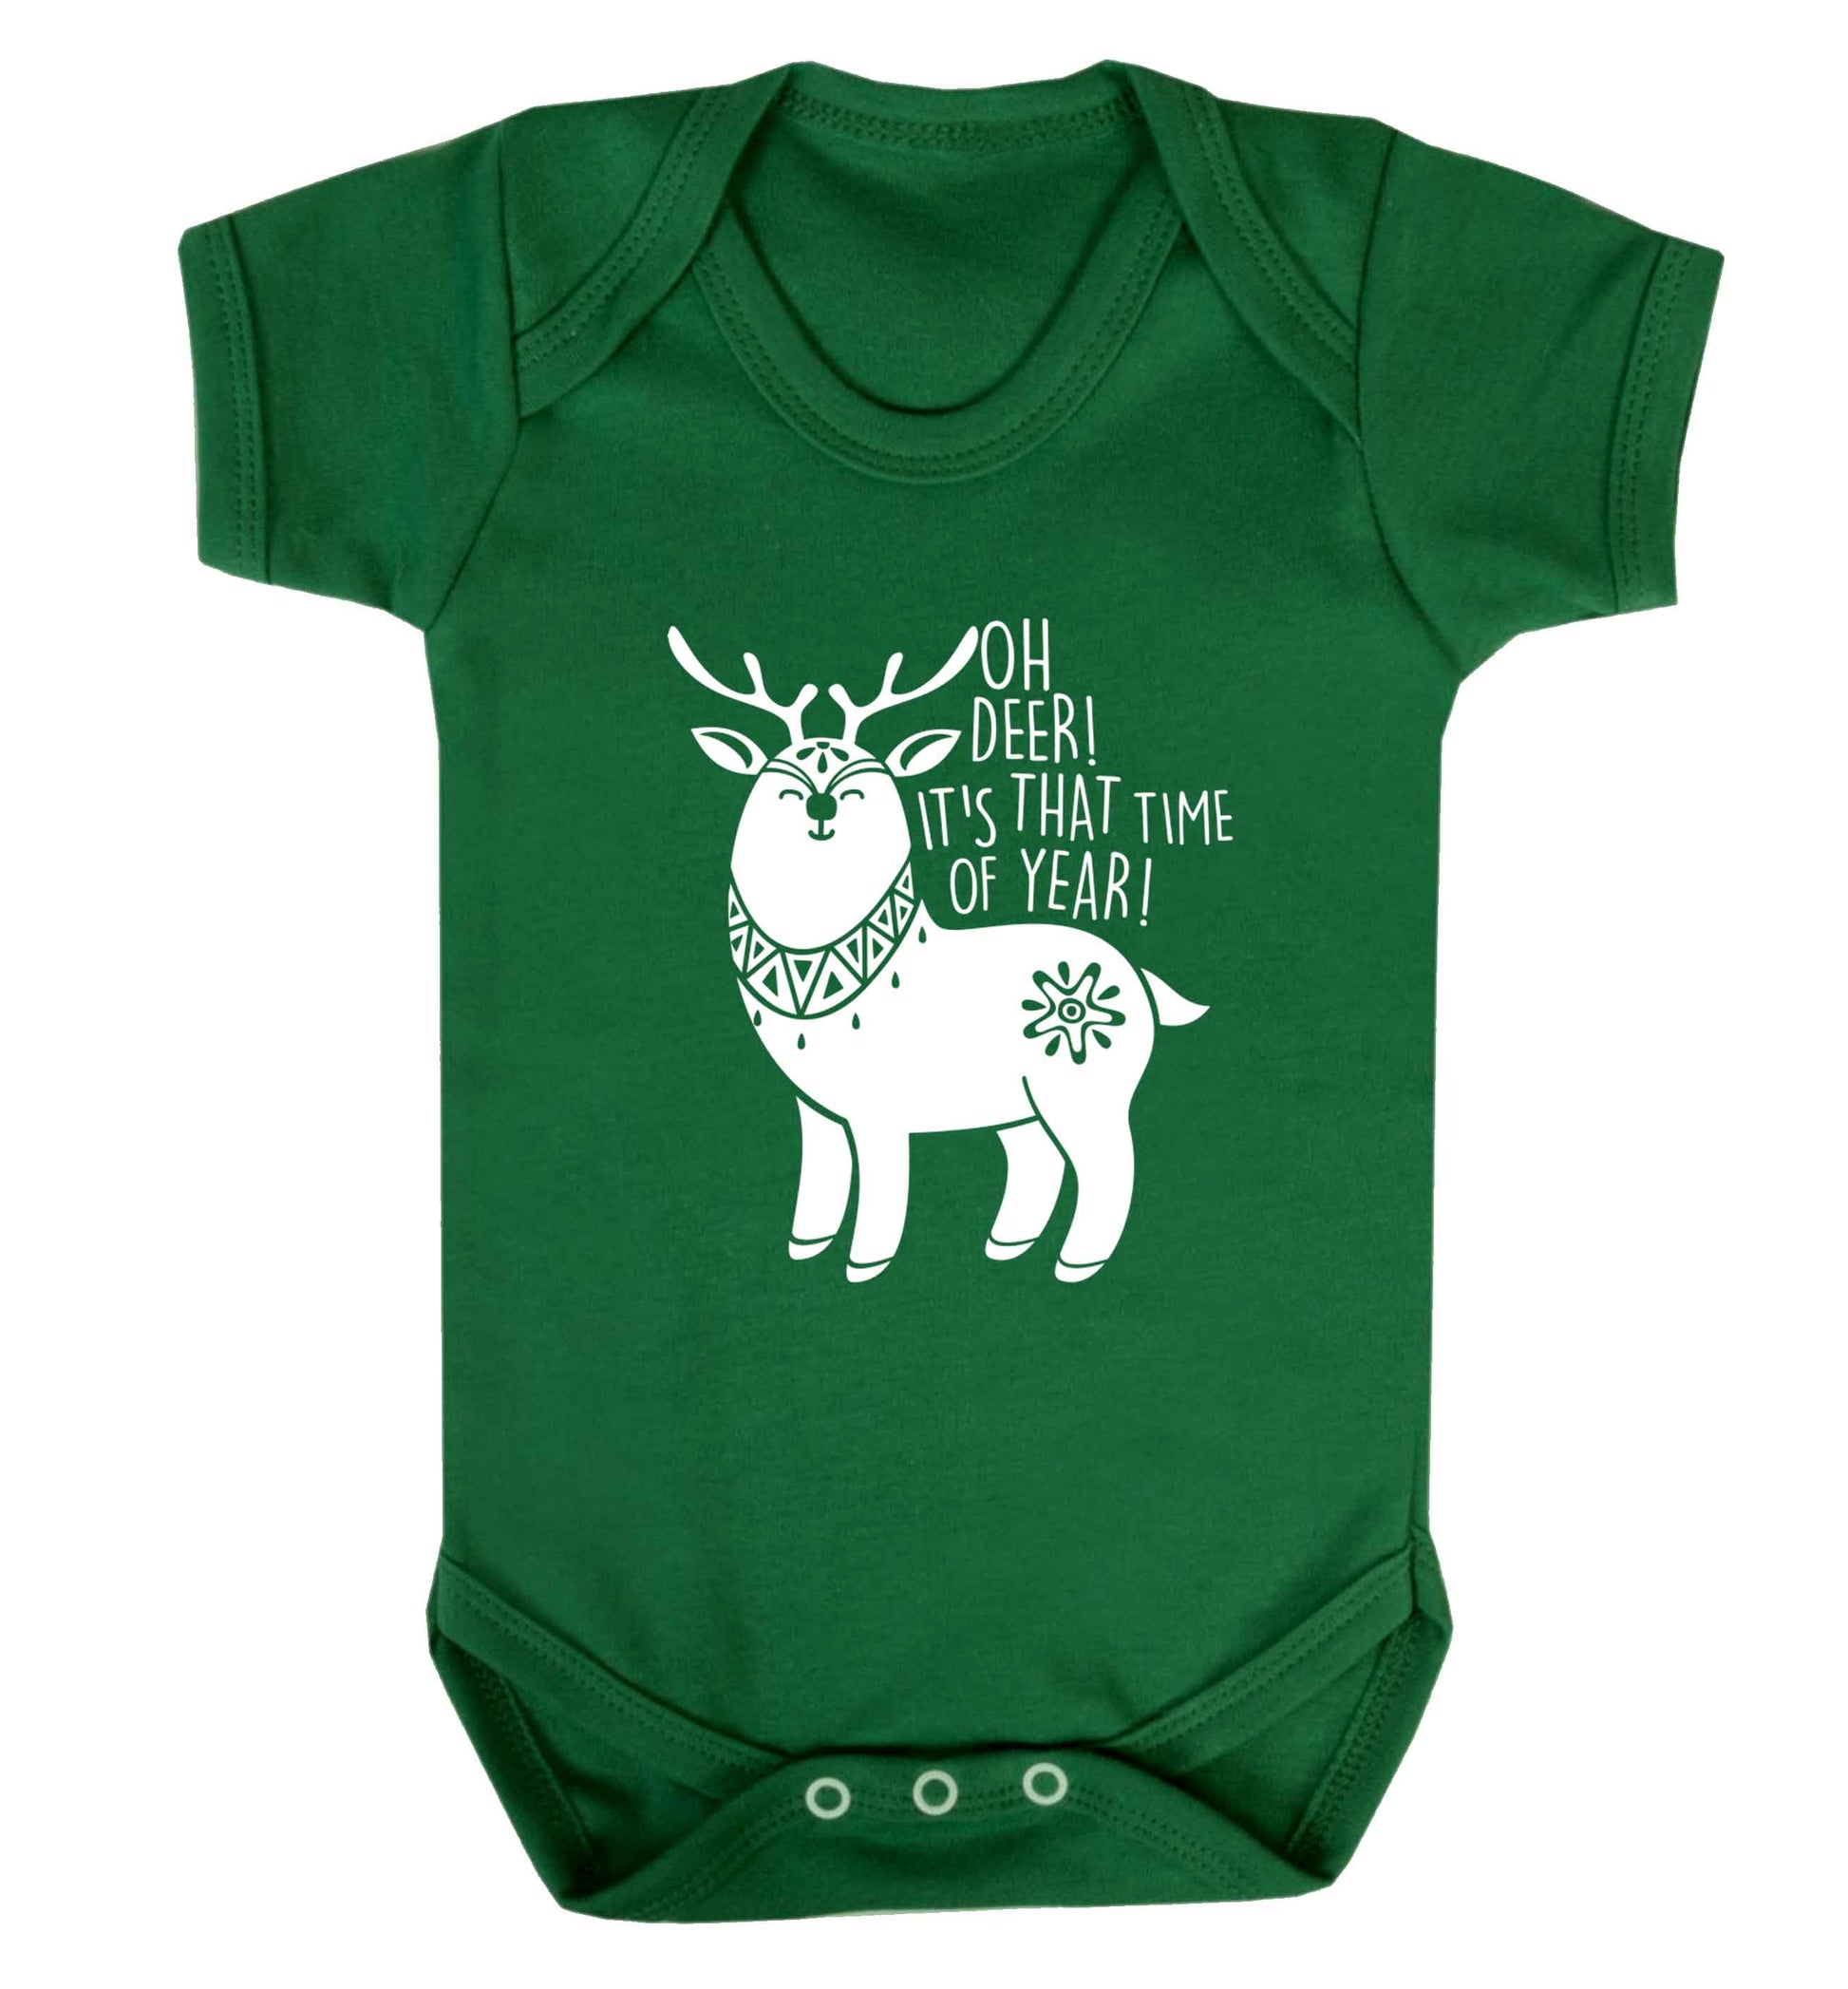 Oh dear it's that time of year Baby Vest green 18-24 months